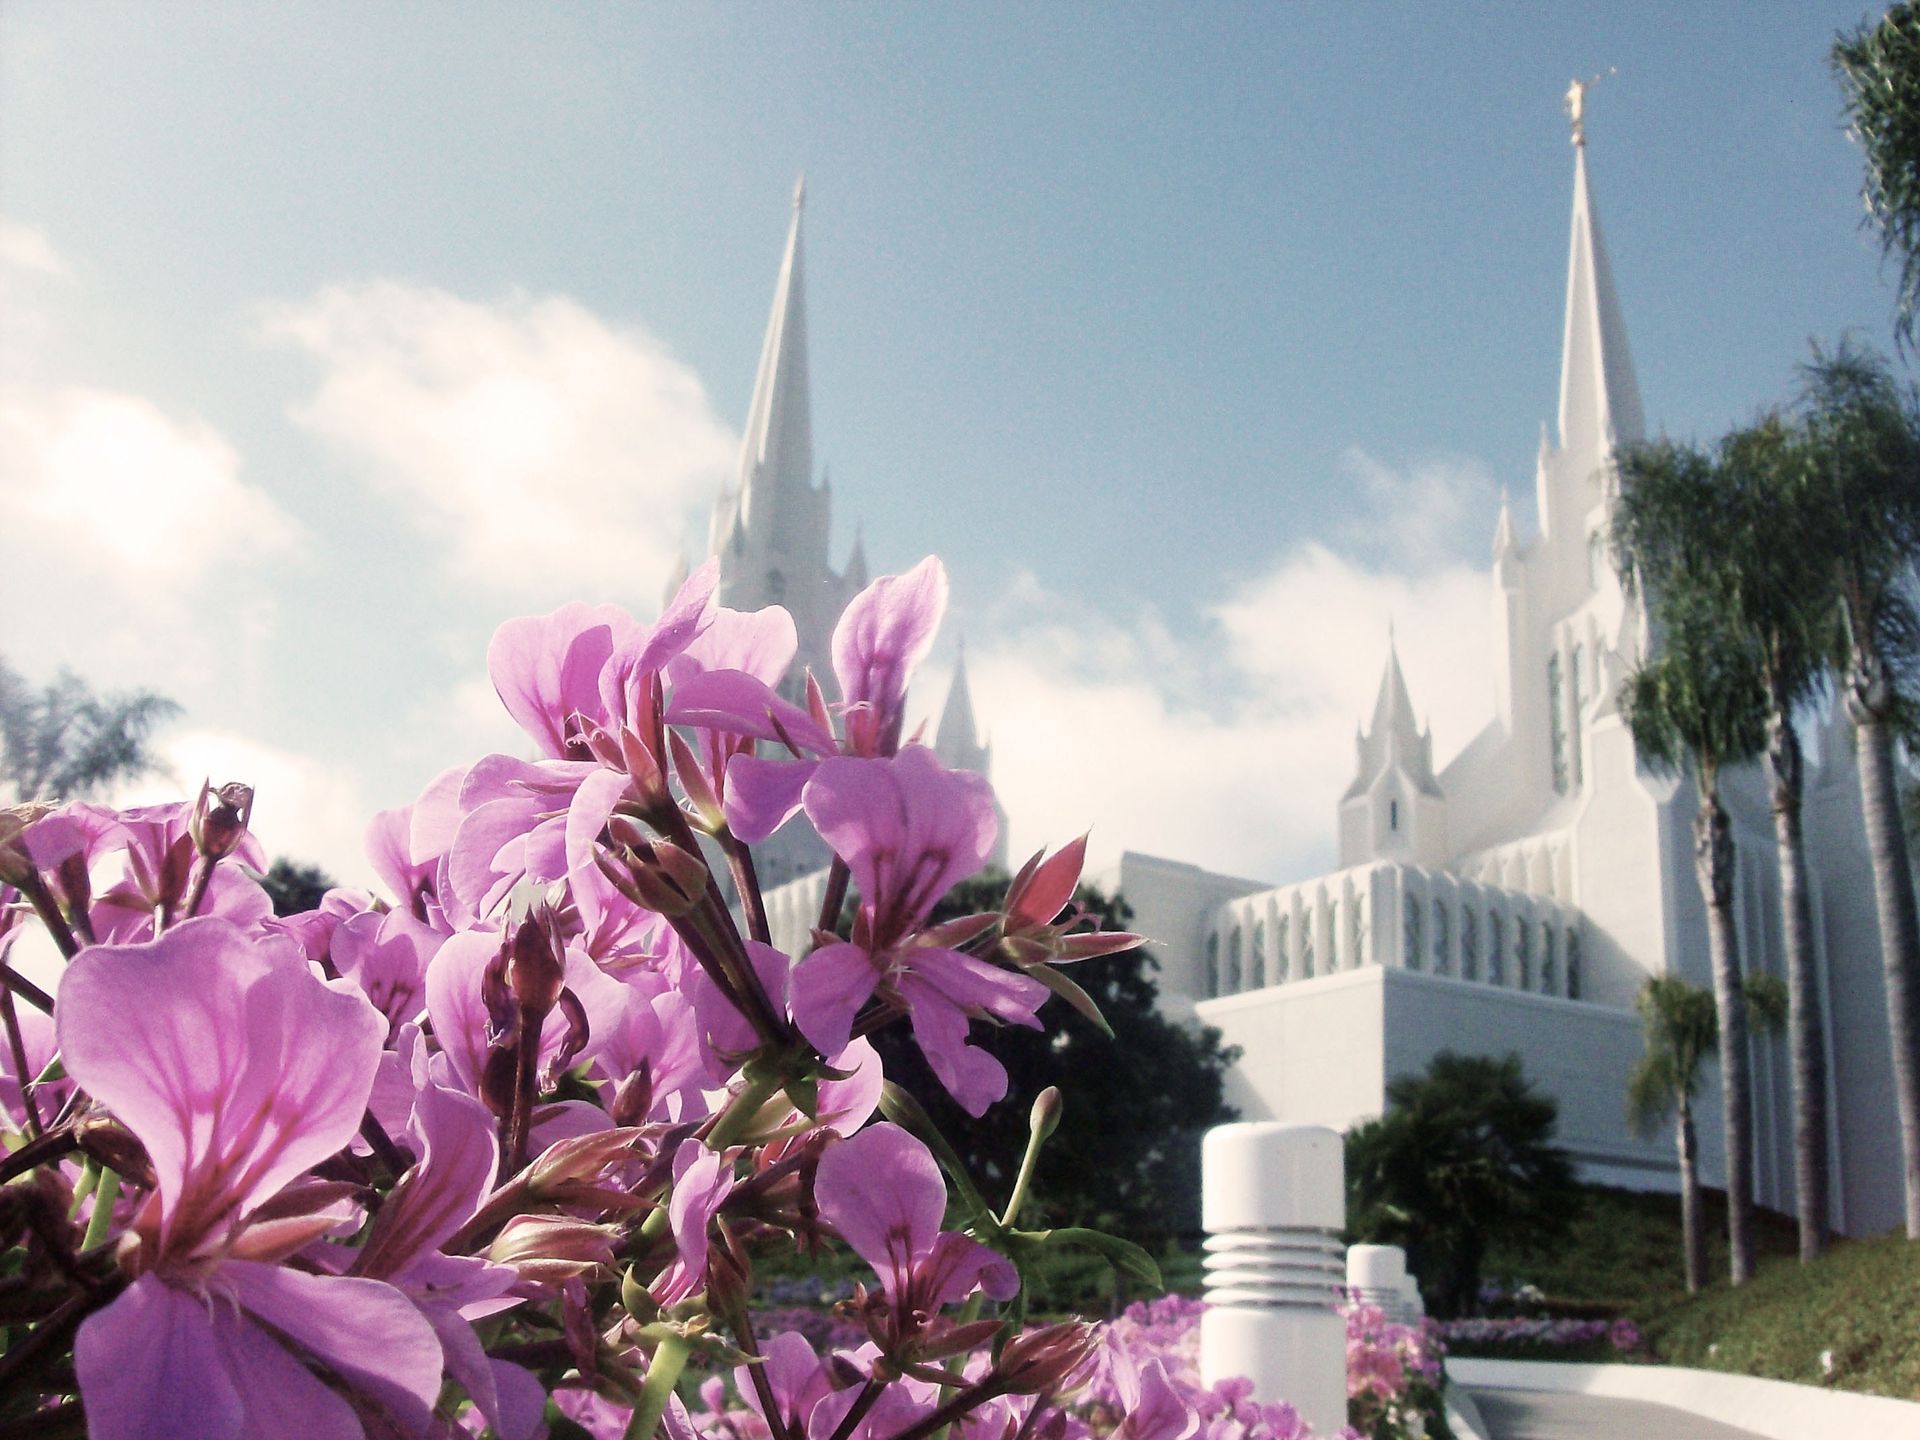 The San Diego California Temple, including the spires and scenery.